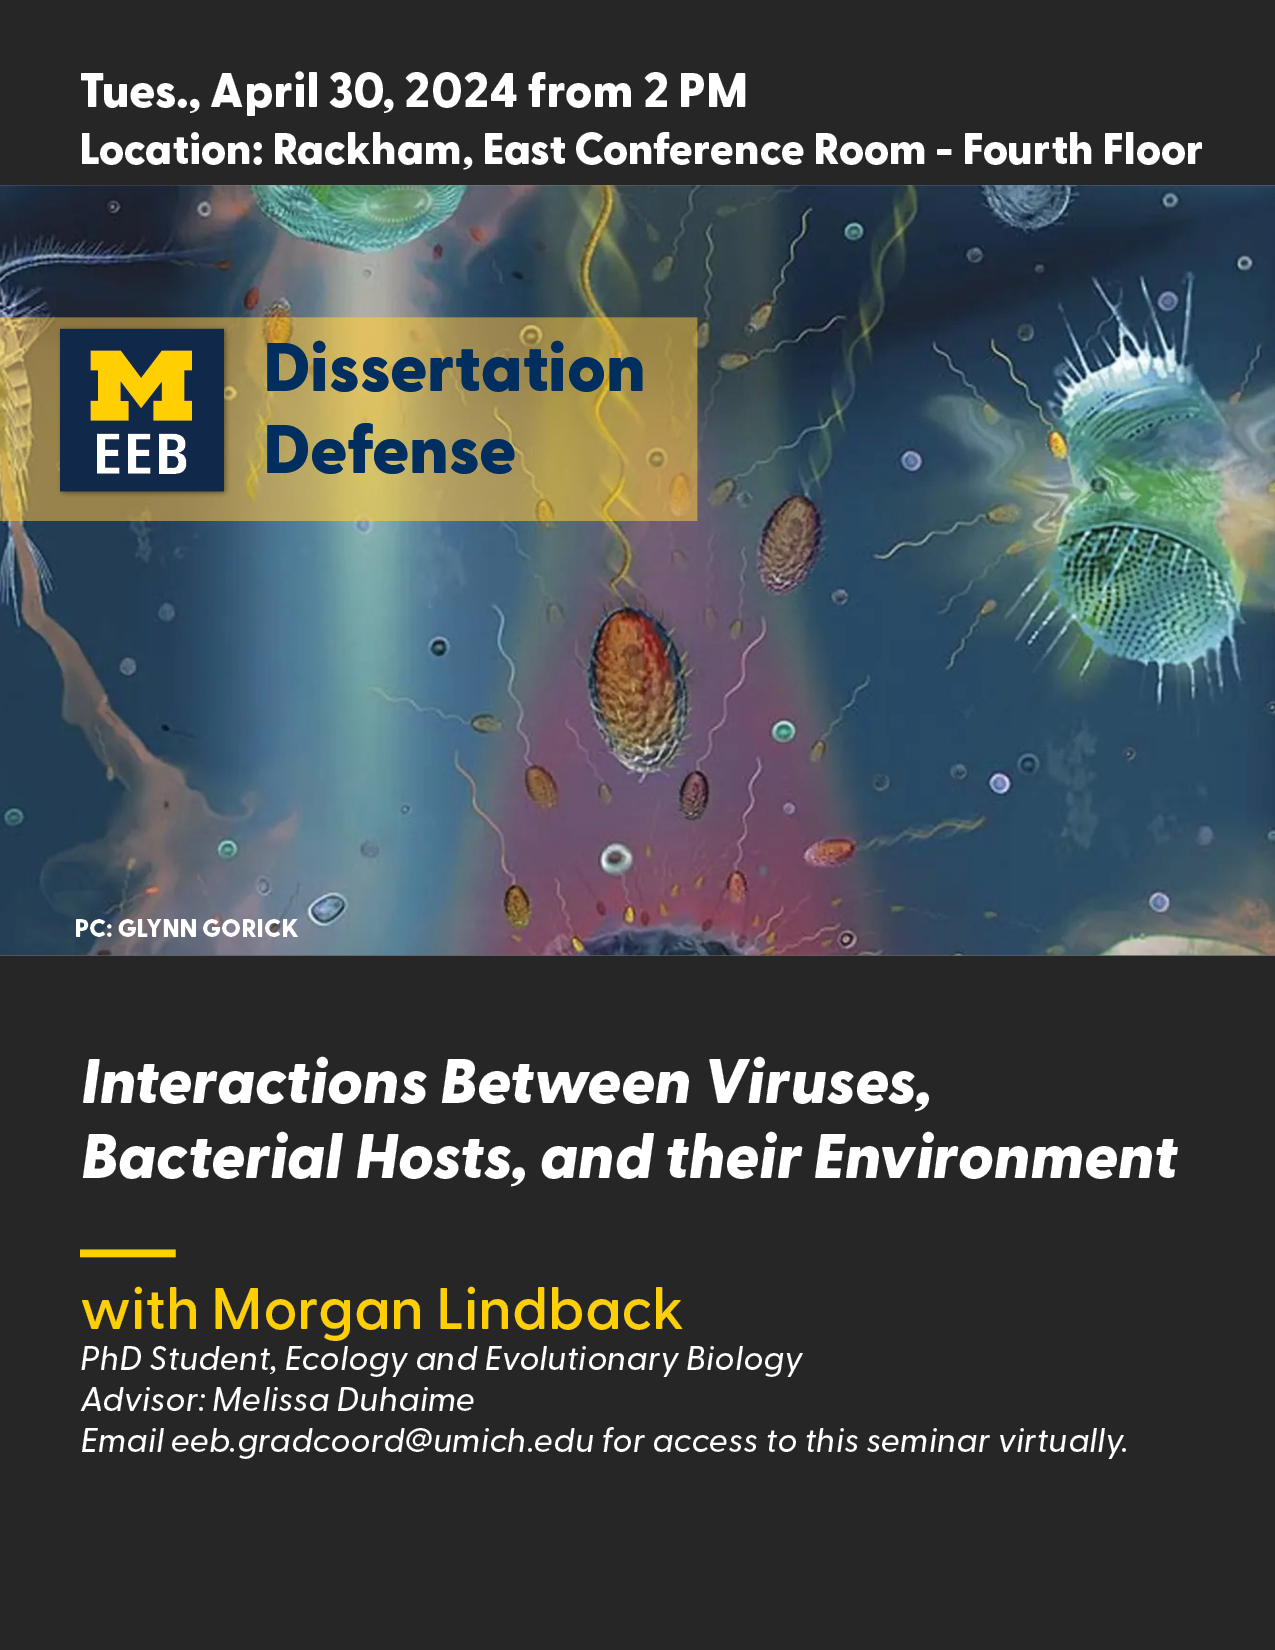 Event flyer with event details and a dramatic image of microbes in the water.